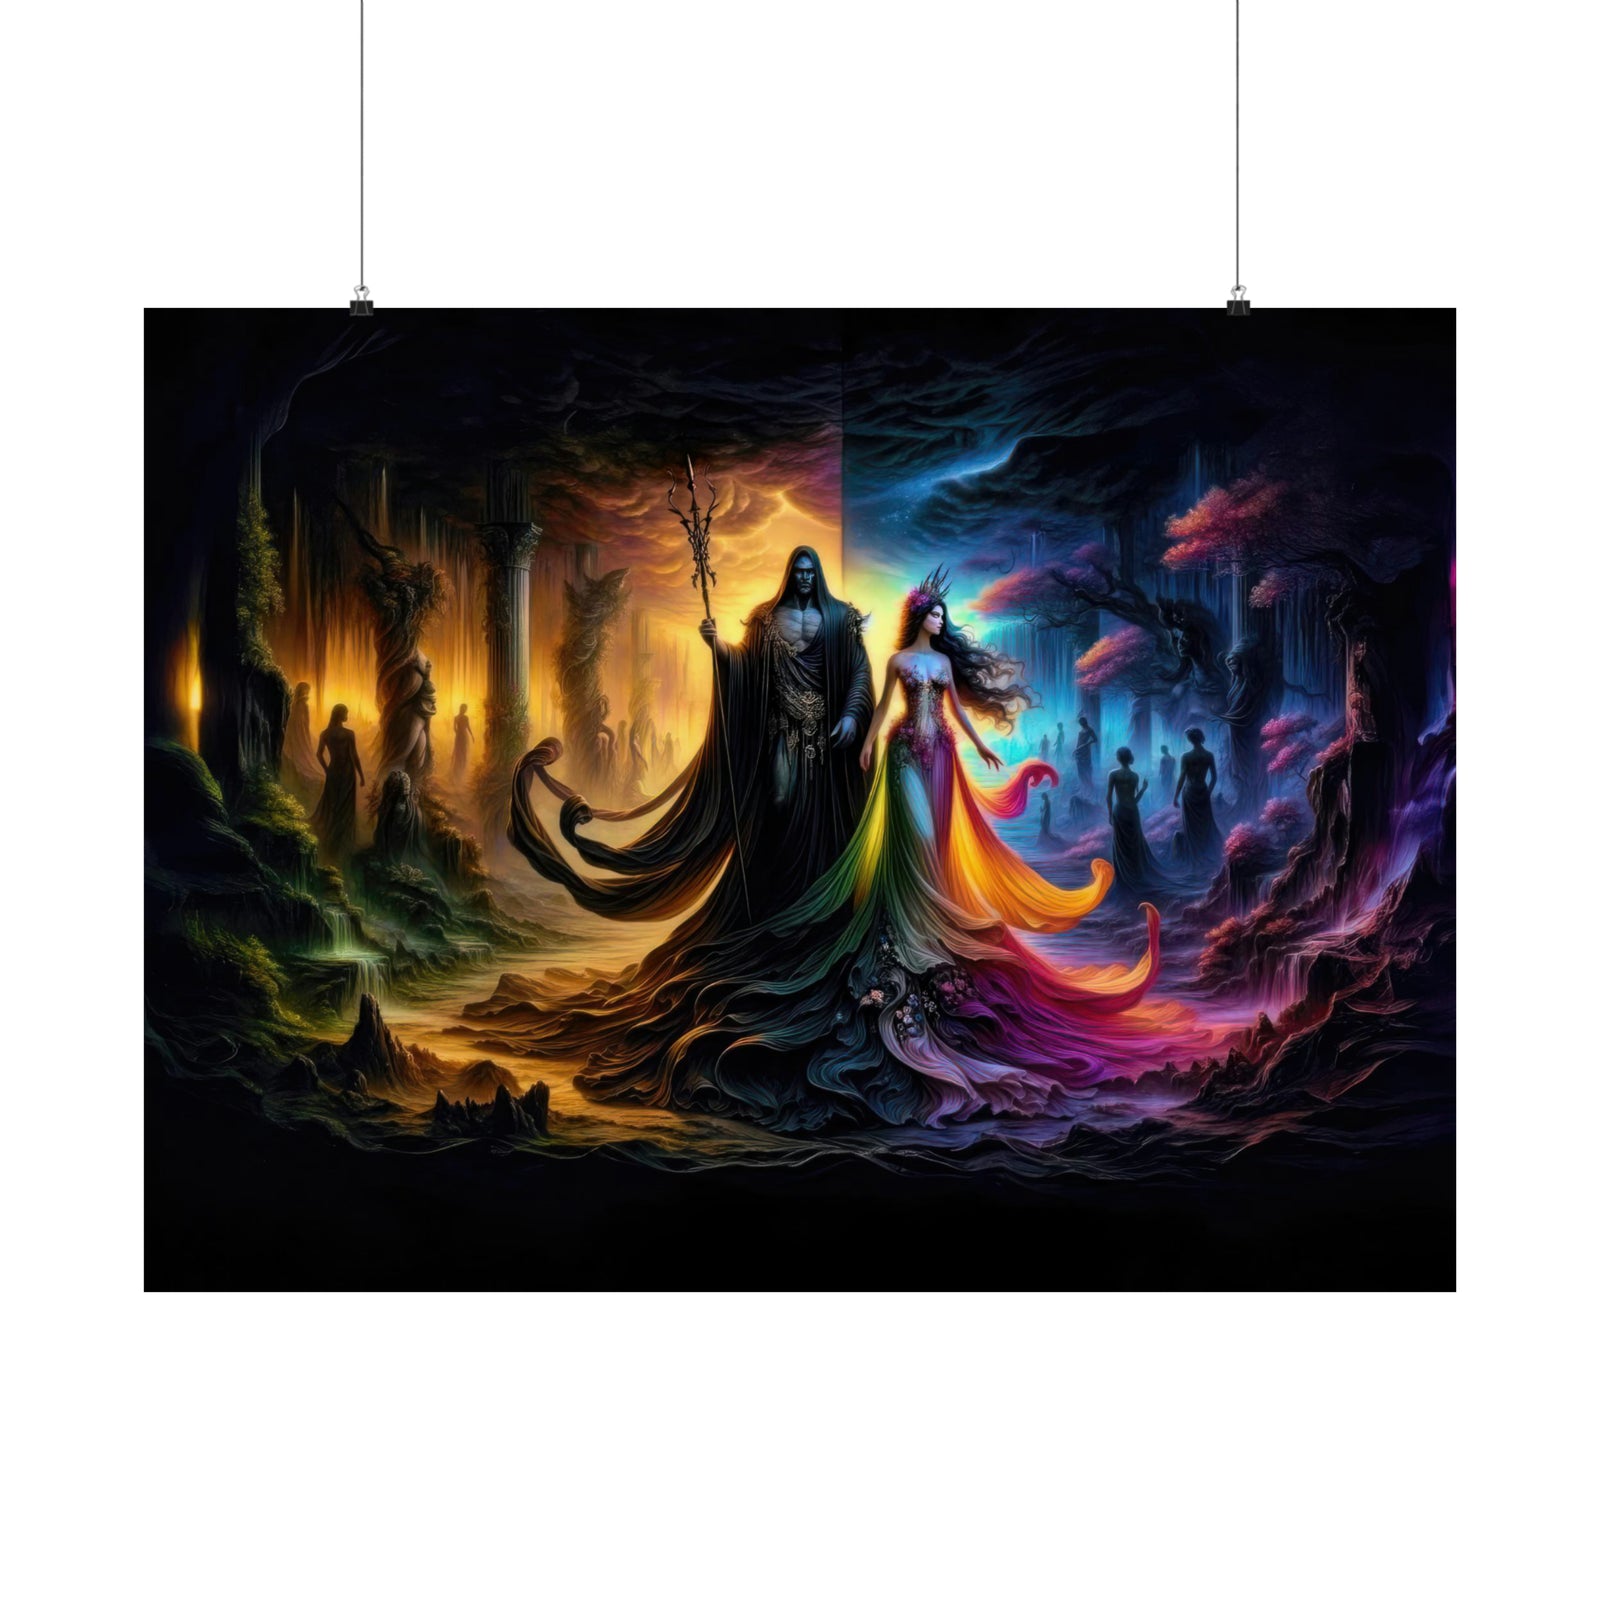 Twilight of the Gods Hades and Persephone Poster